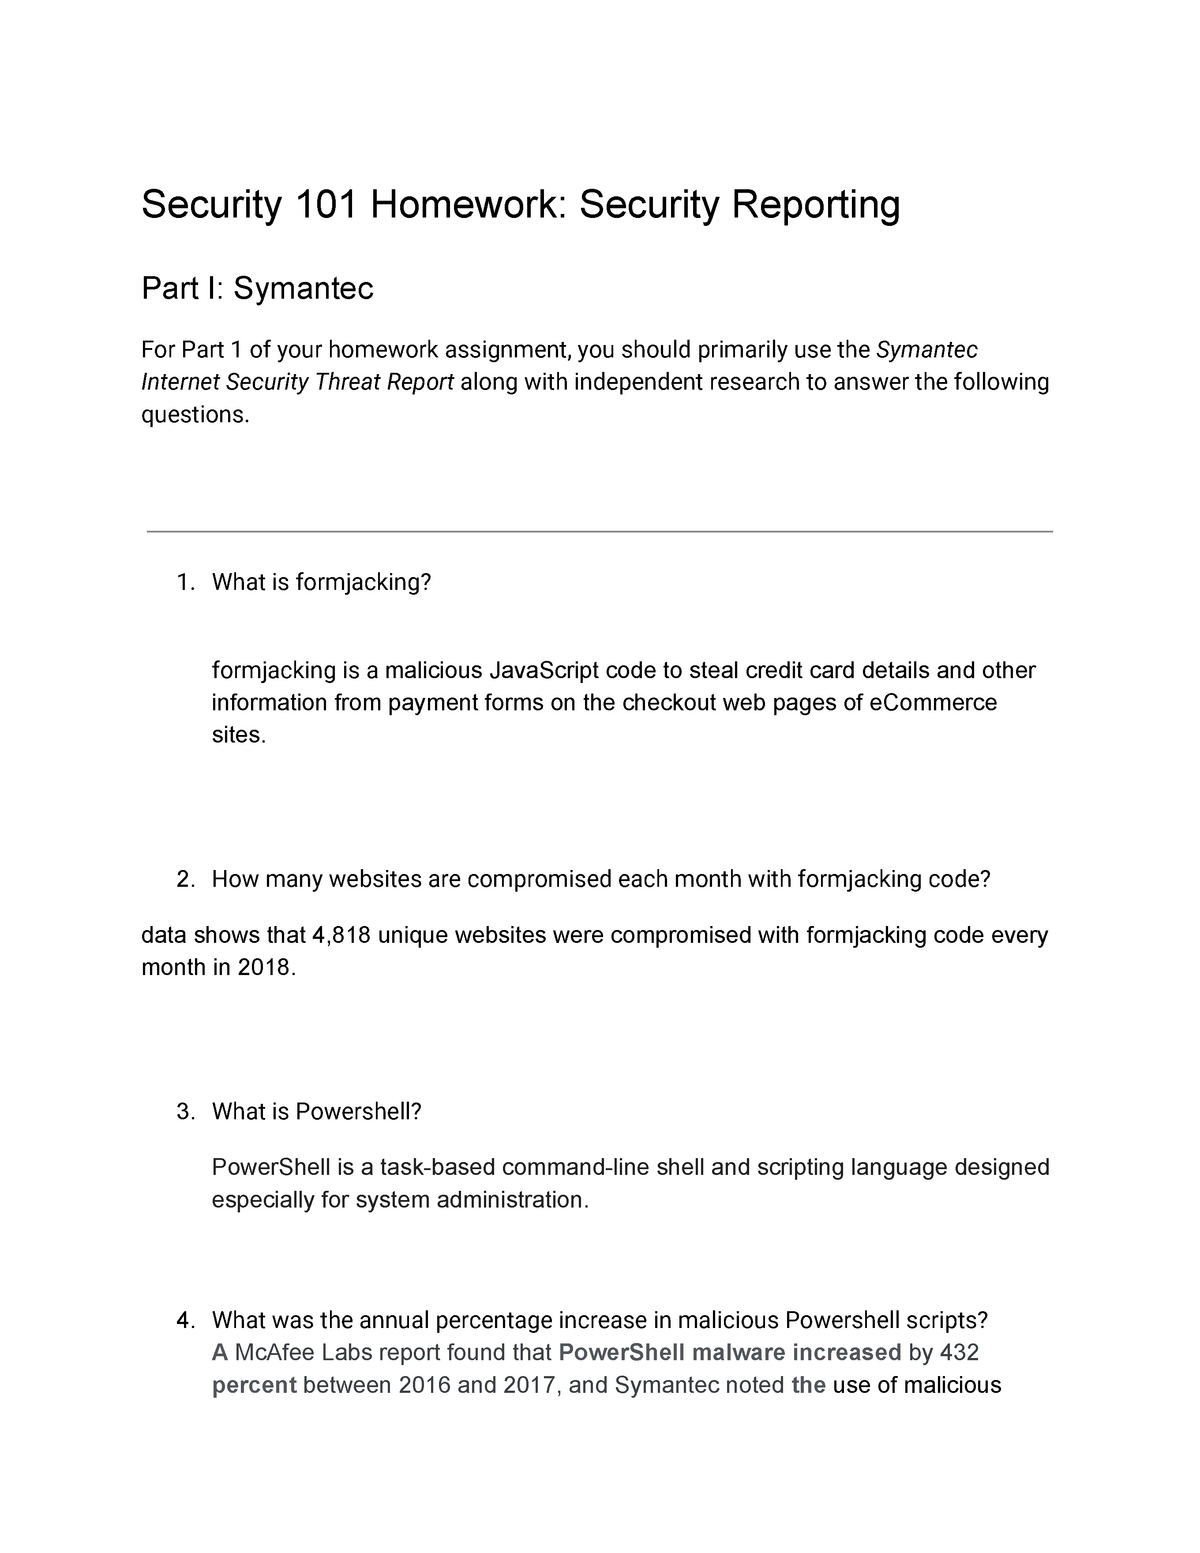 cyber security assignment 1